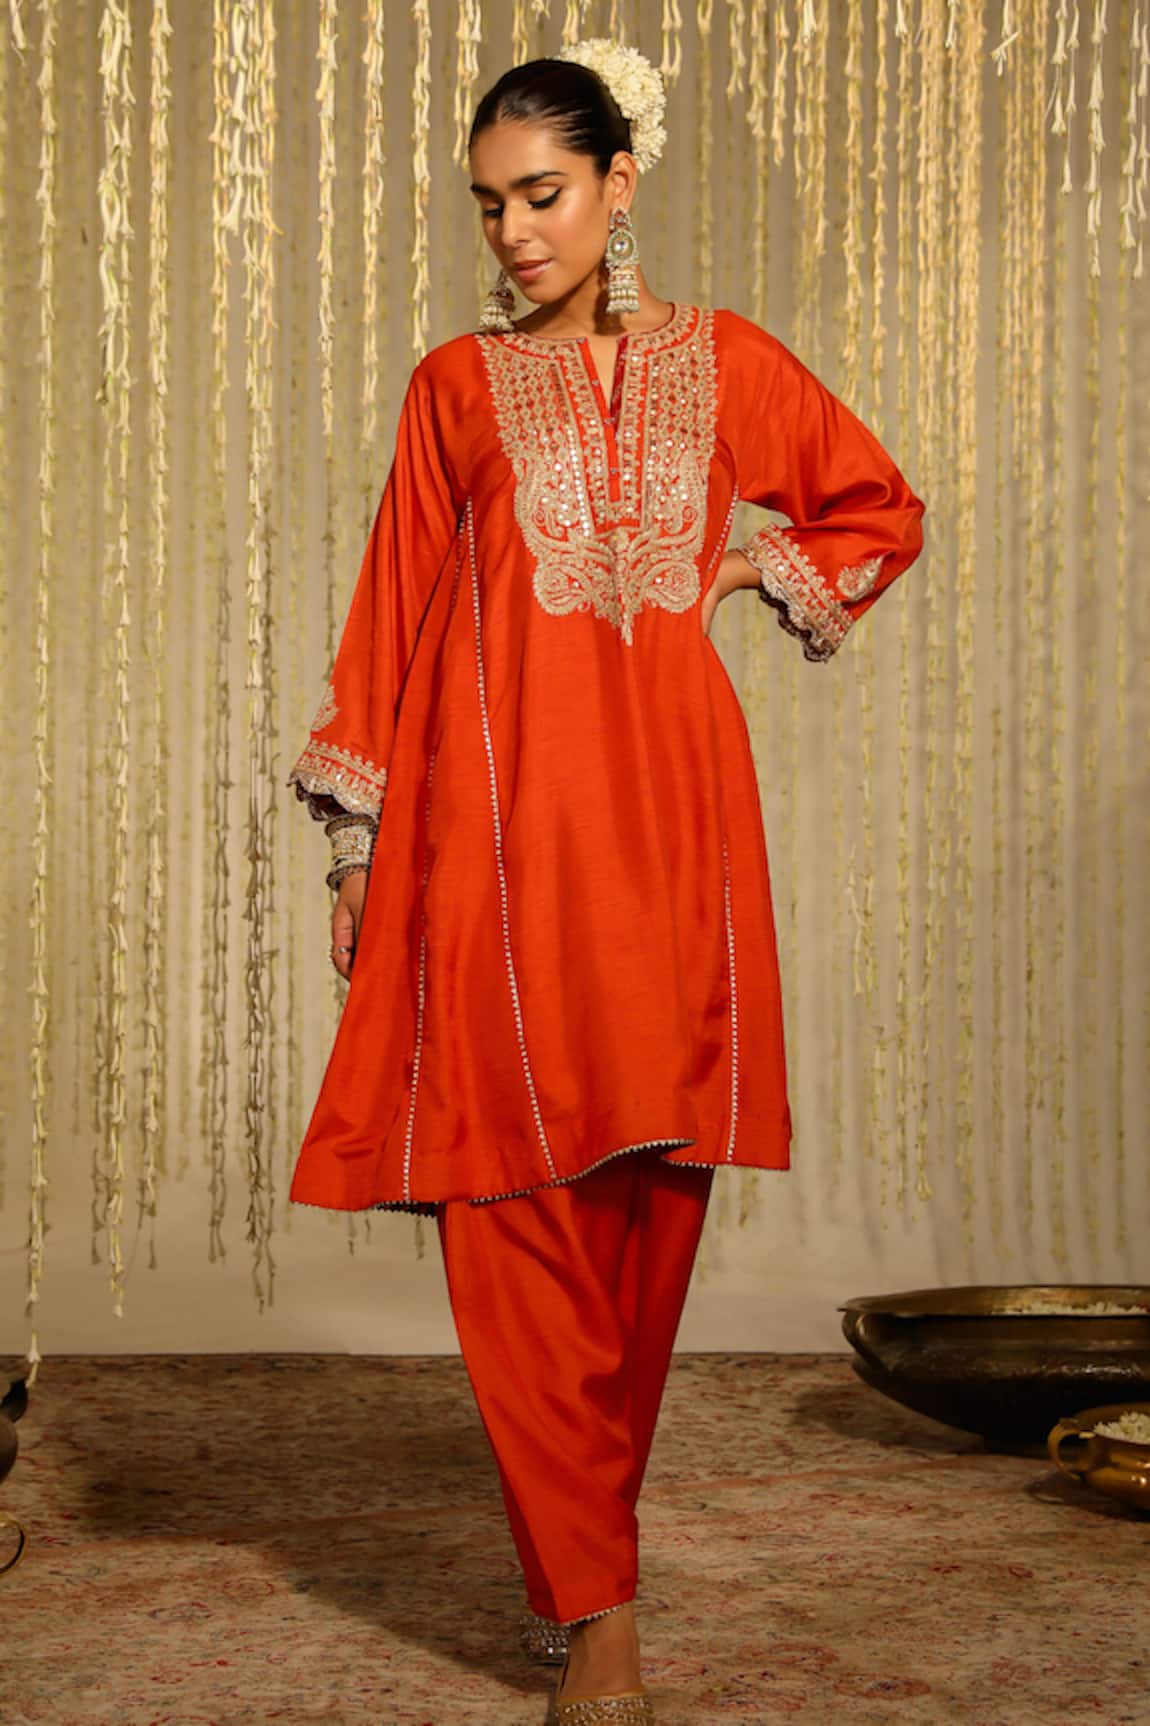 Sheetal Batra Mehreen Placed Floral Paisley Embroidered Anarkali With Dogri Salwar